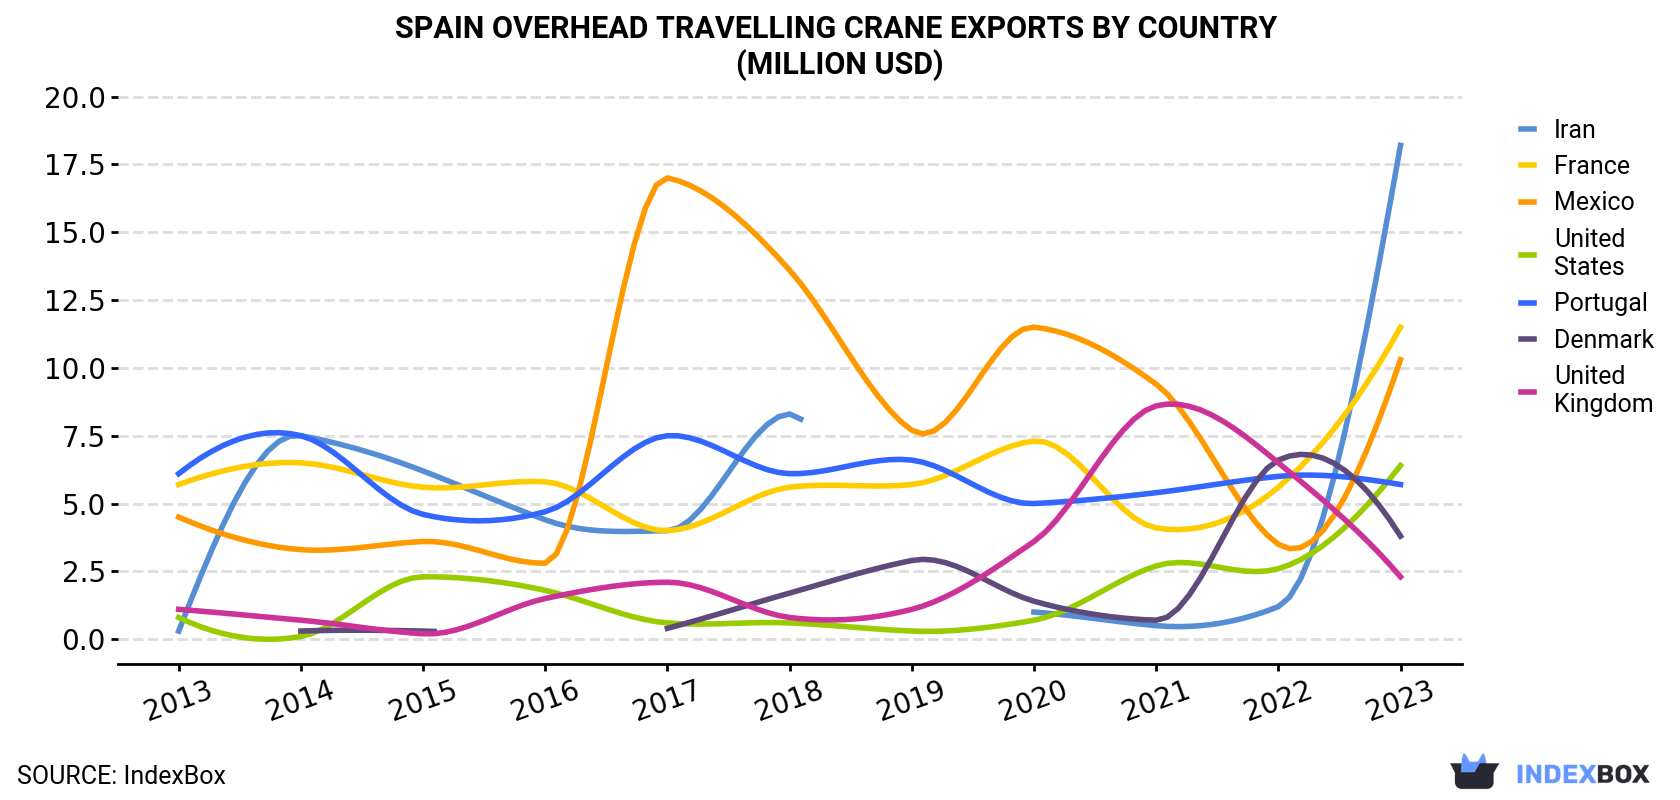 Spain Overhead Travelling Crane Exports By Country (Million USD)